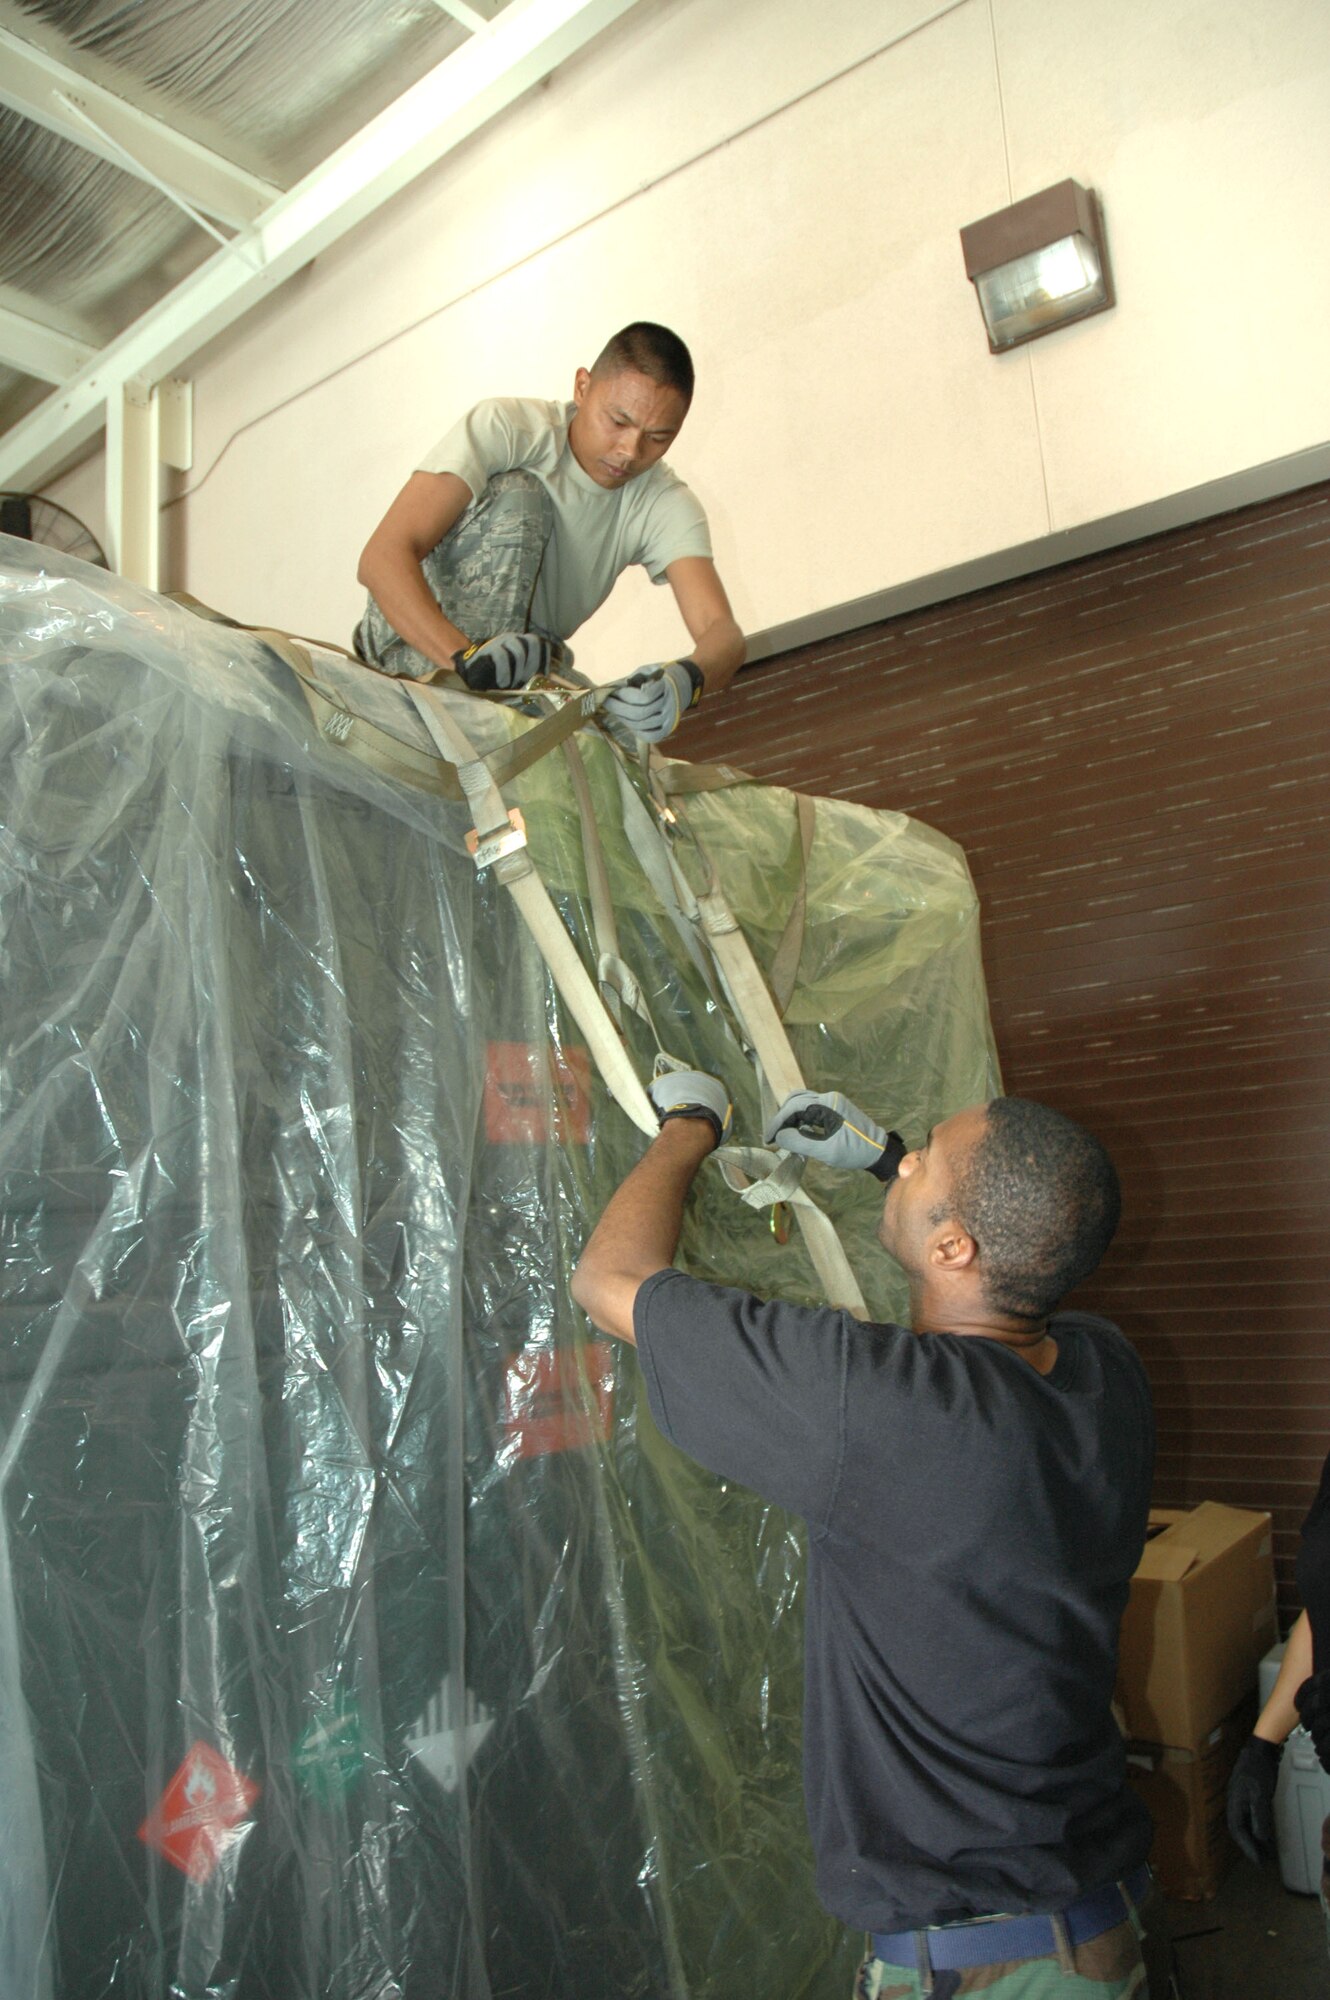 Tech. Sgt. Andrew Sana (top) and Tech. Sgt. Dedric Brown, 624th Civil
Engineer Squadron, fasten a net on top of a pallet loaded with CE support
equipment.  624th CES is participating in an Operational Readiness
Inspection which kicked off Feb. 5 at Hickam Air Force Base, Hawaii. 
